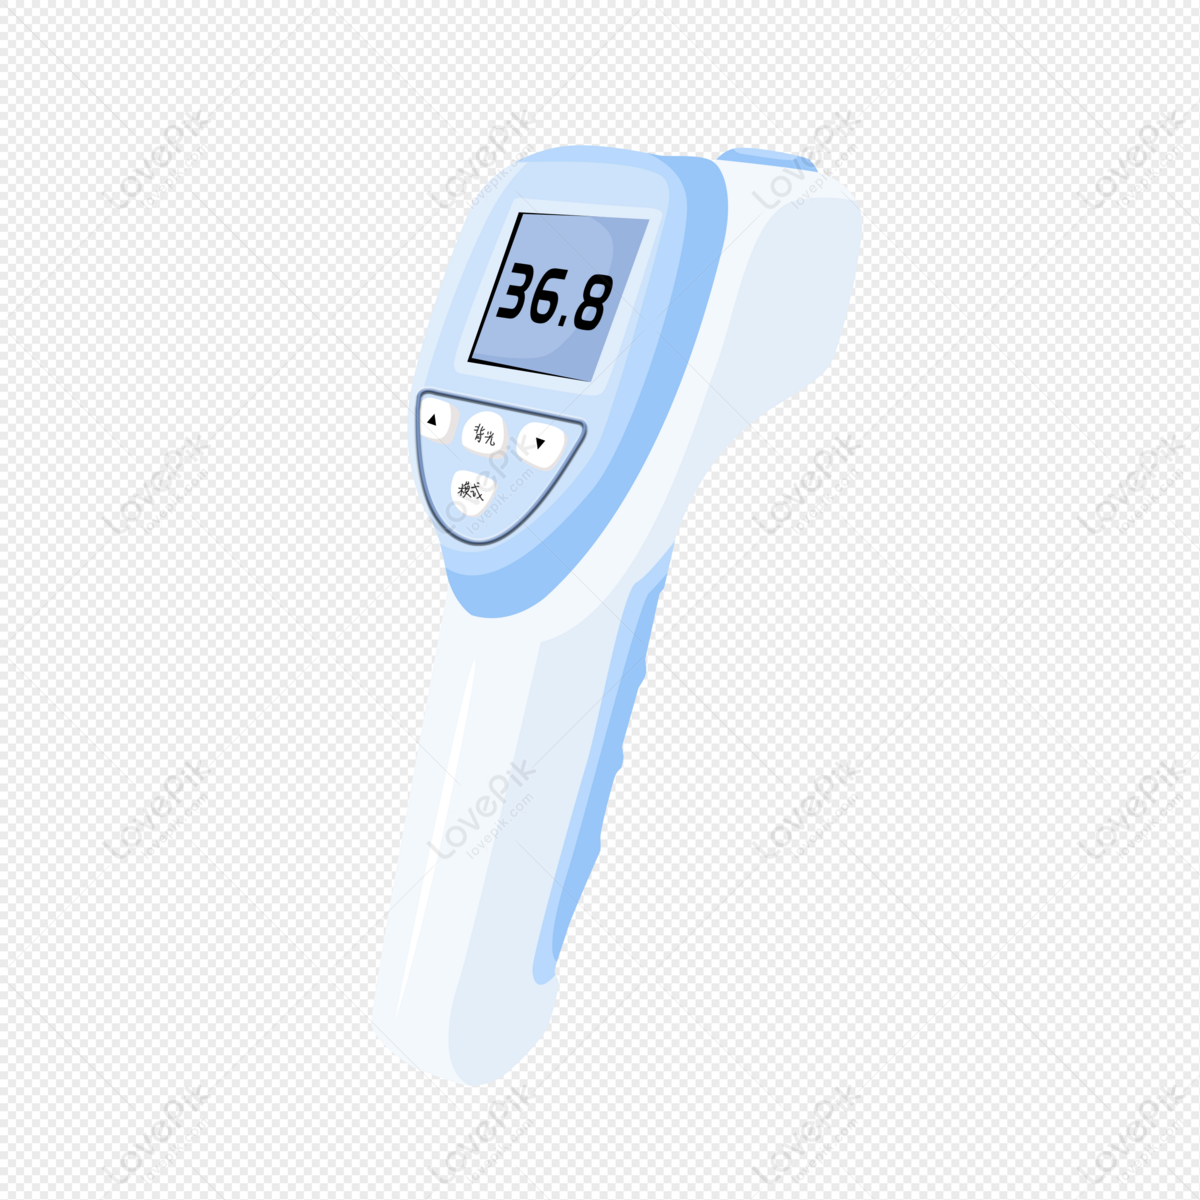 https://img.lovepik.com/free-png/20210928/lovepik-thermometer-for-measuring-body-temperature-png-image_401687136_wh1200.png